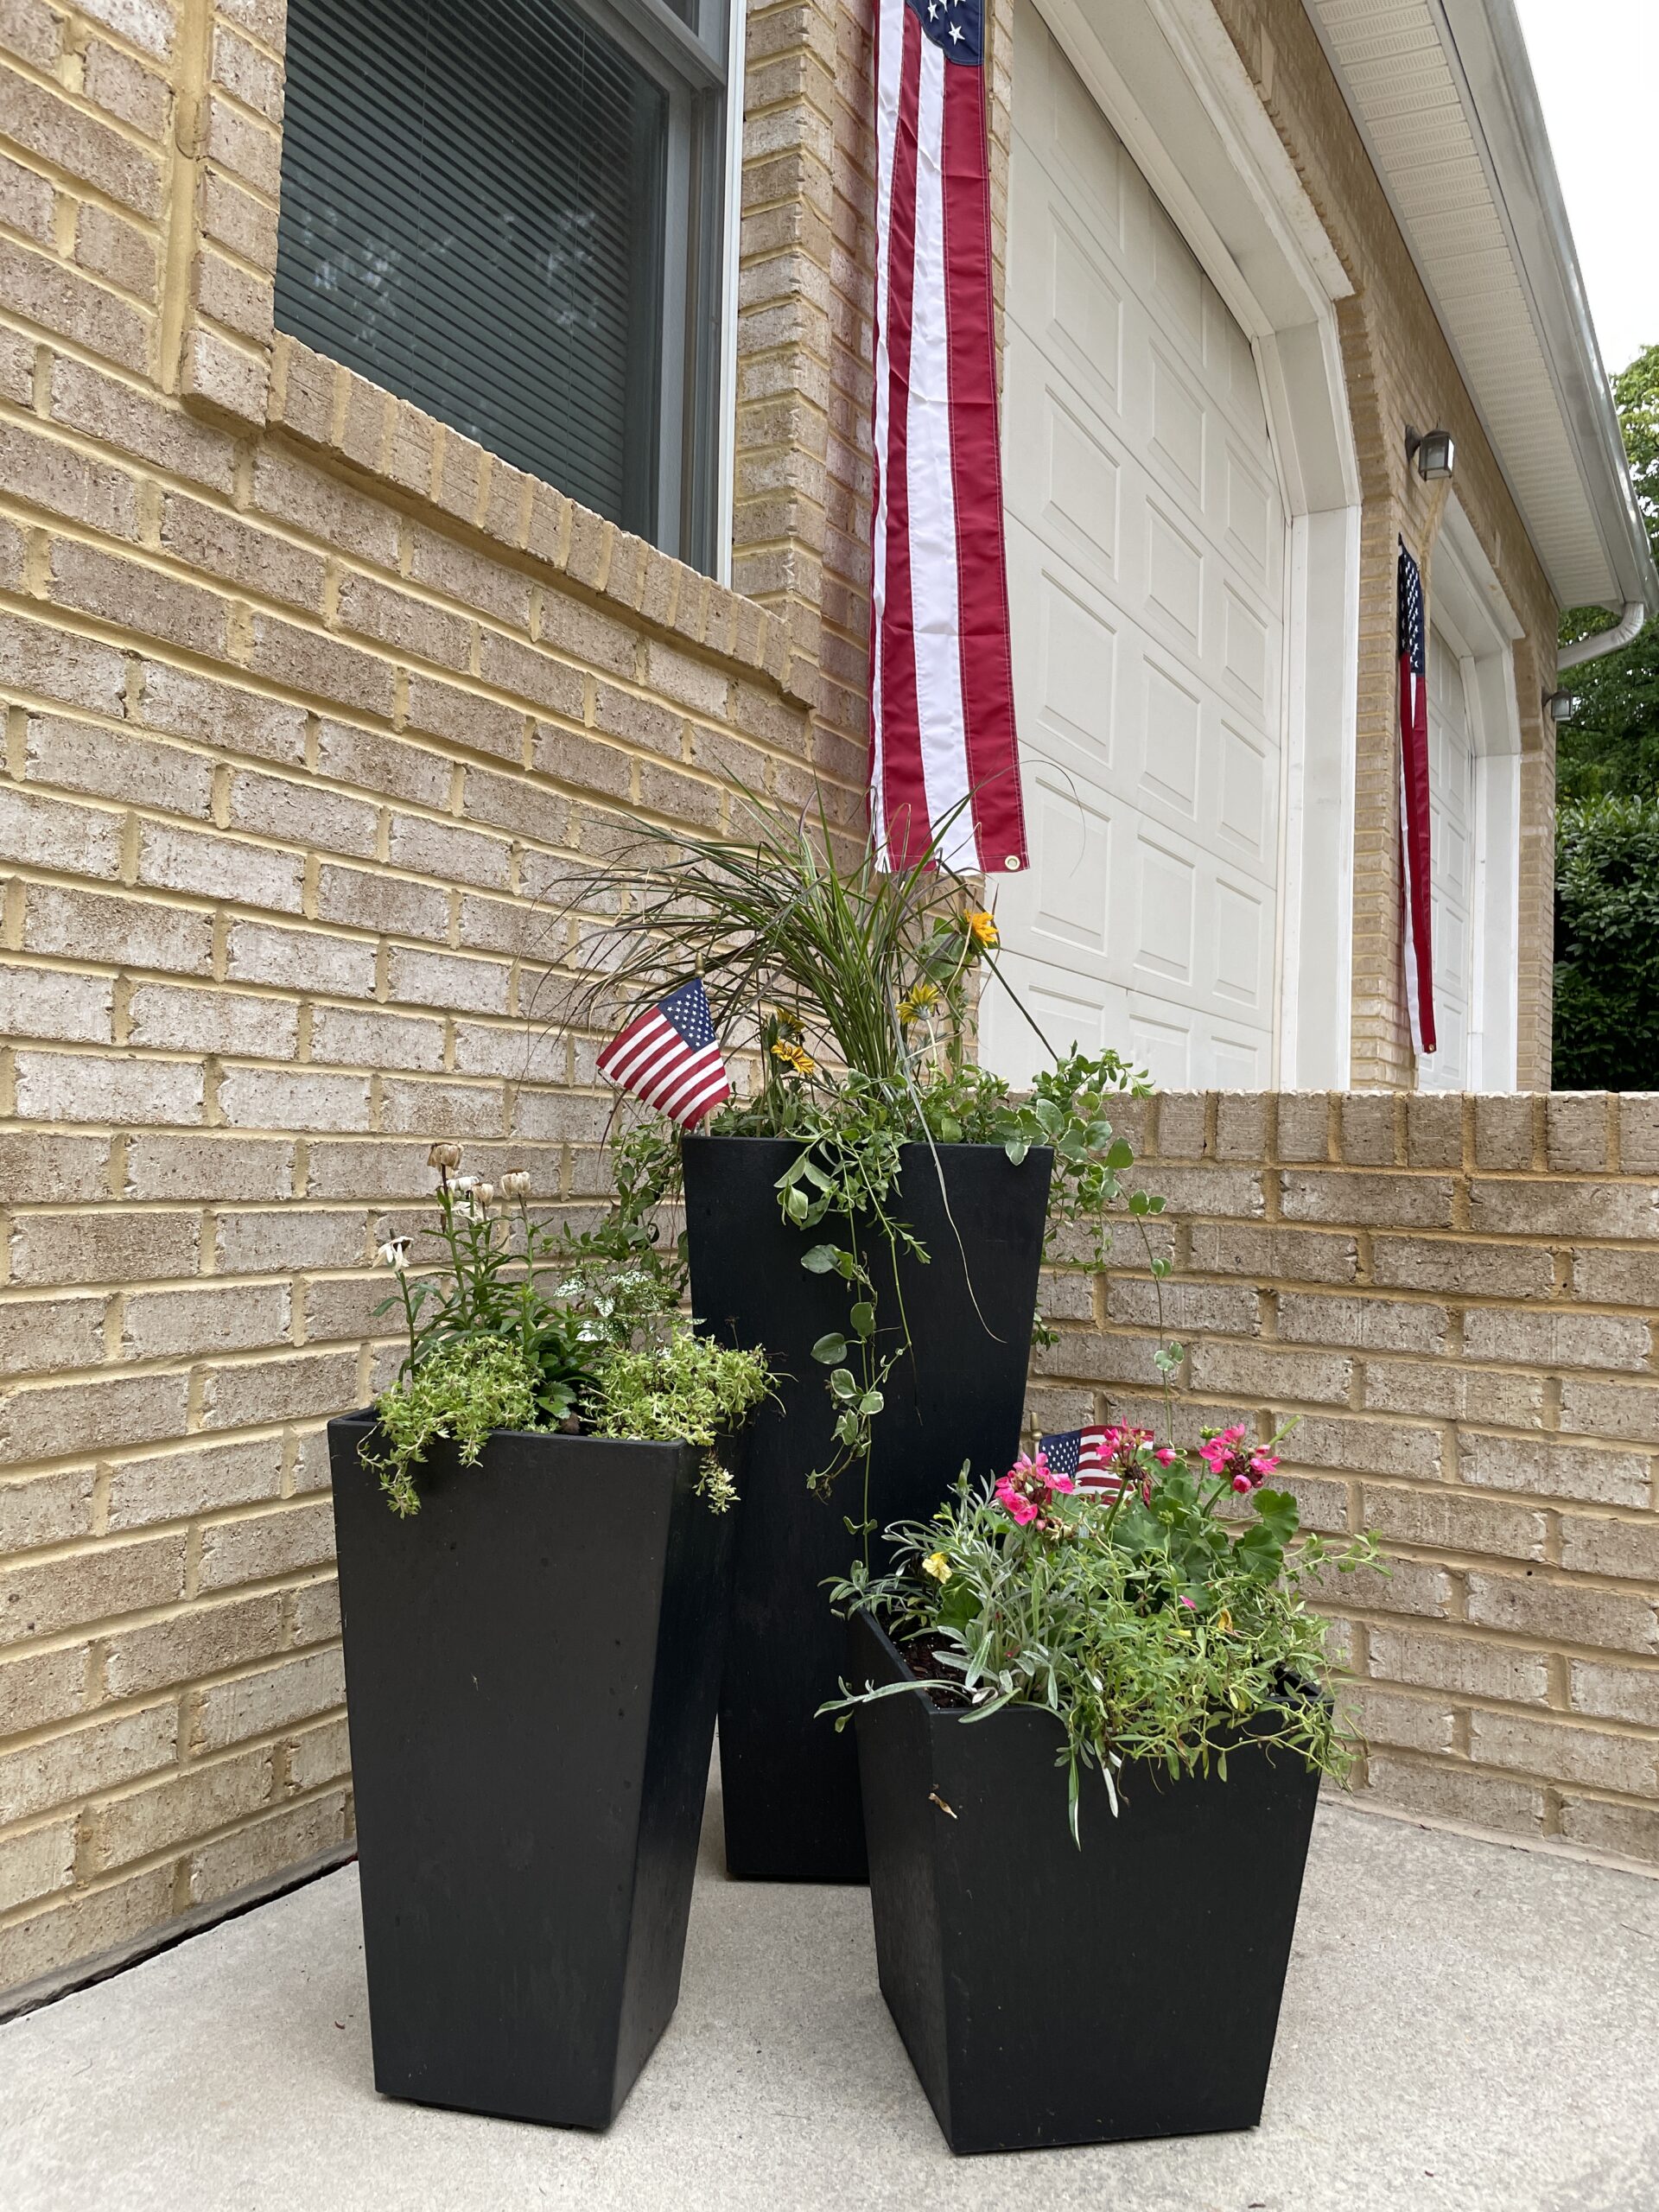 Filler Ideas for Large Planters - Frugal Upstate